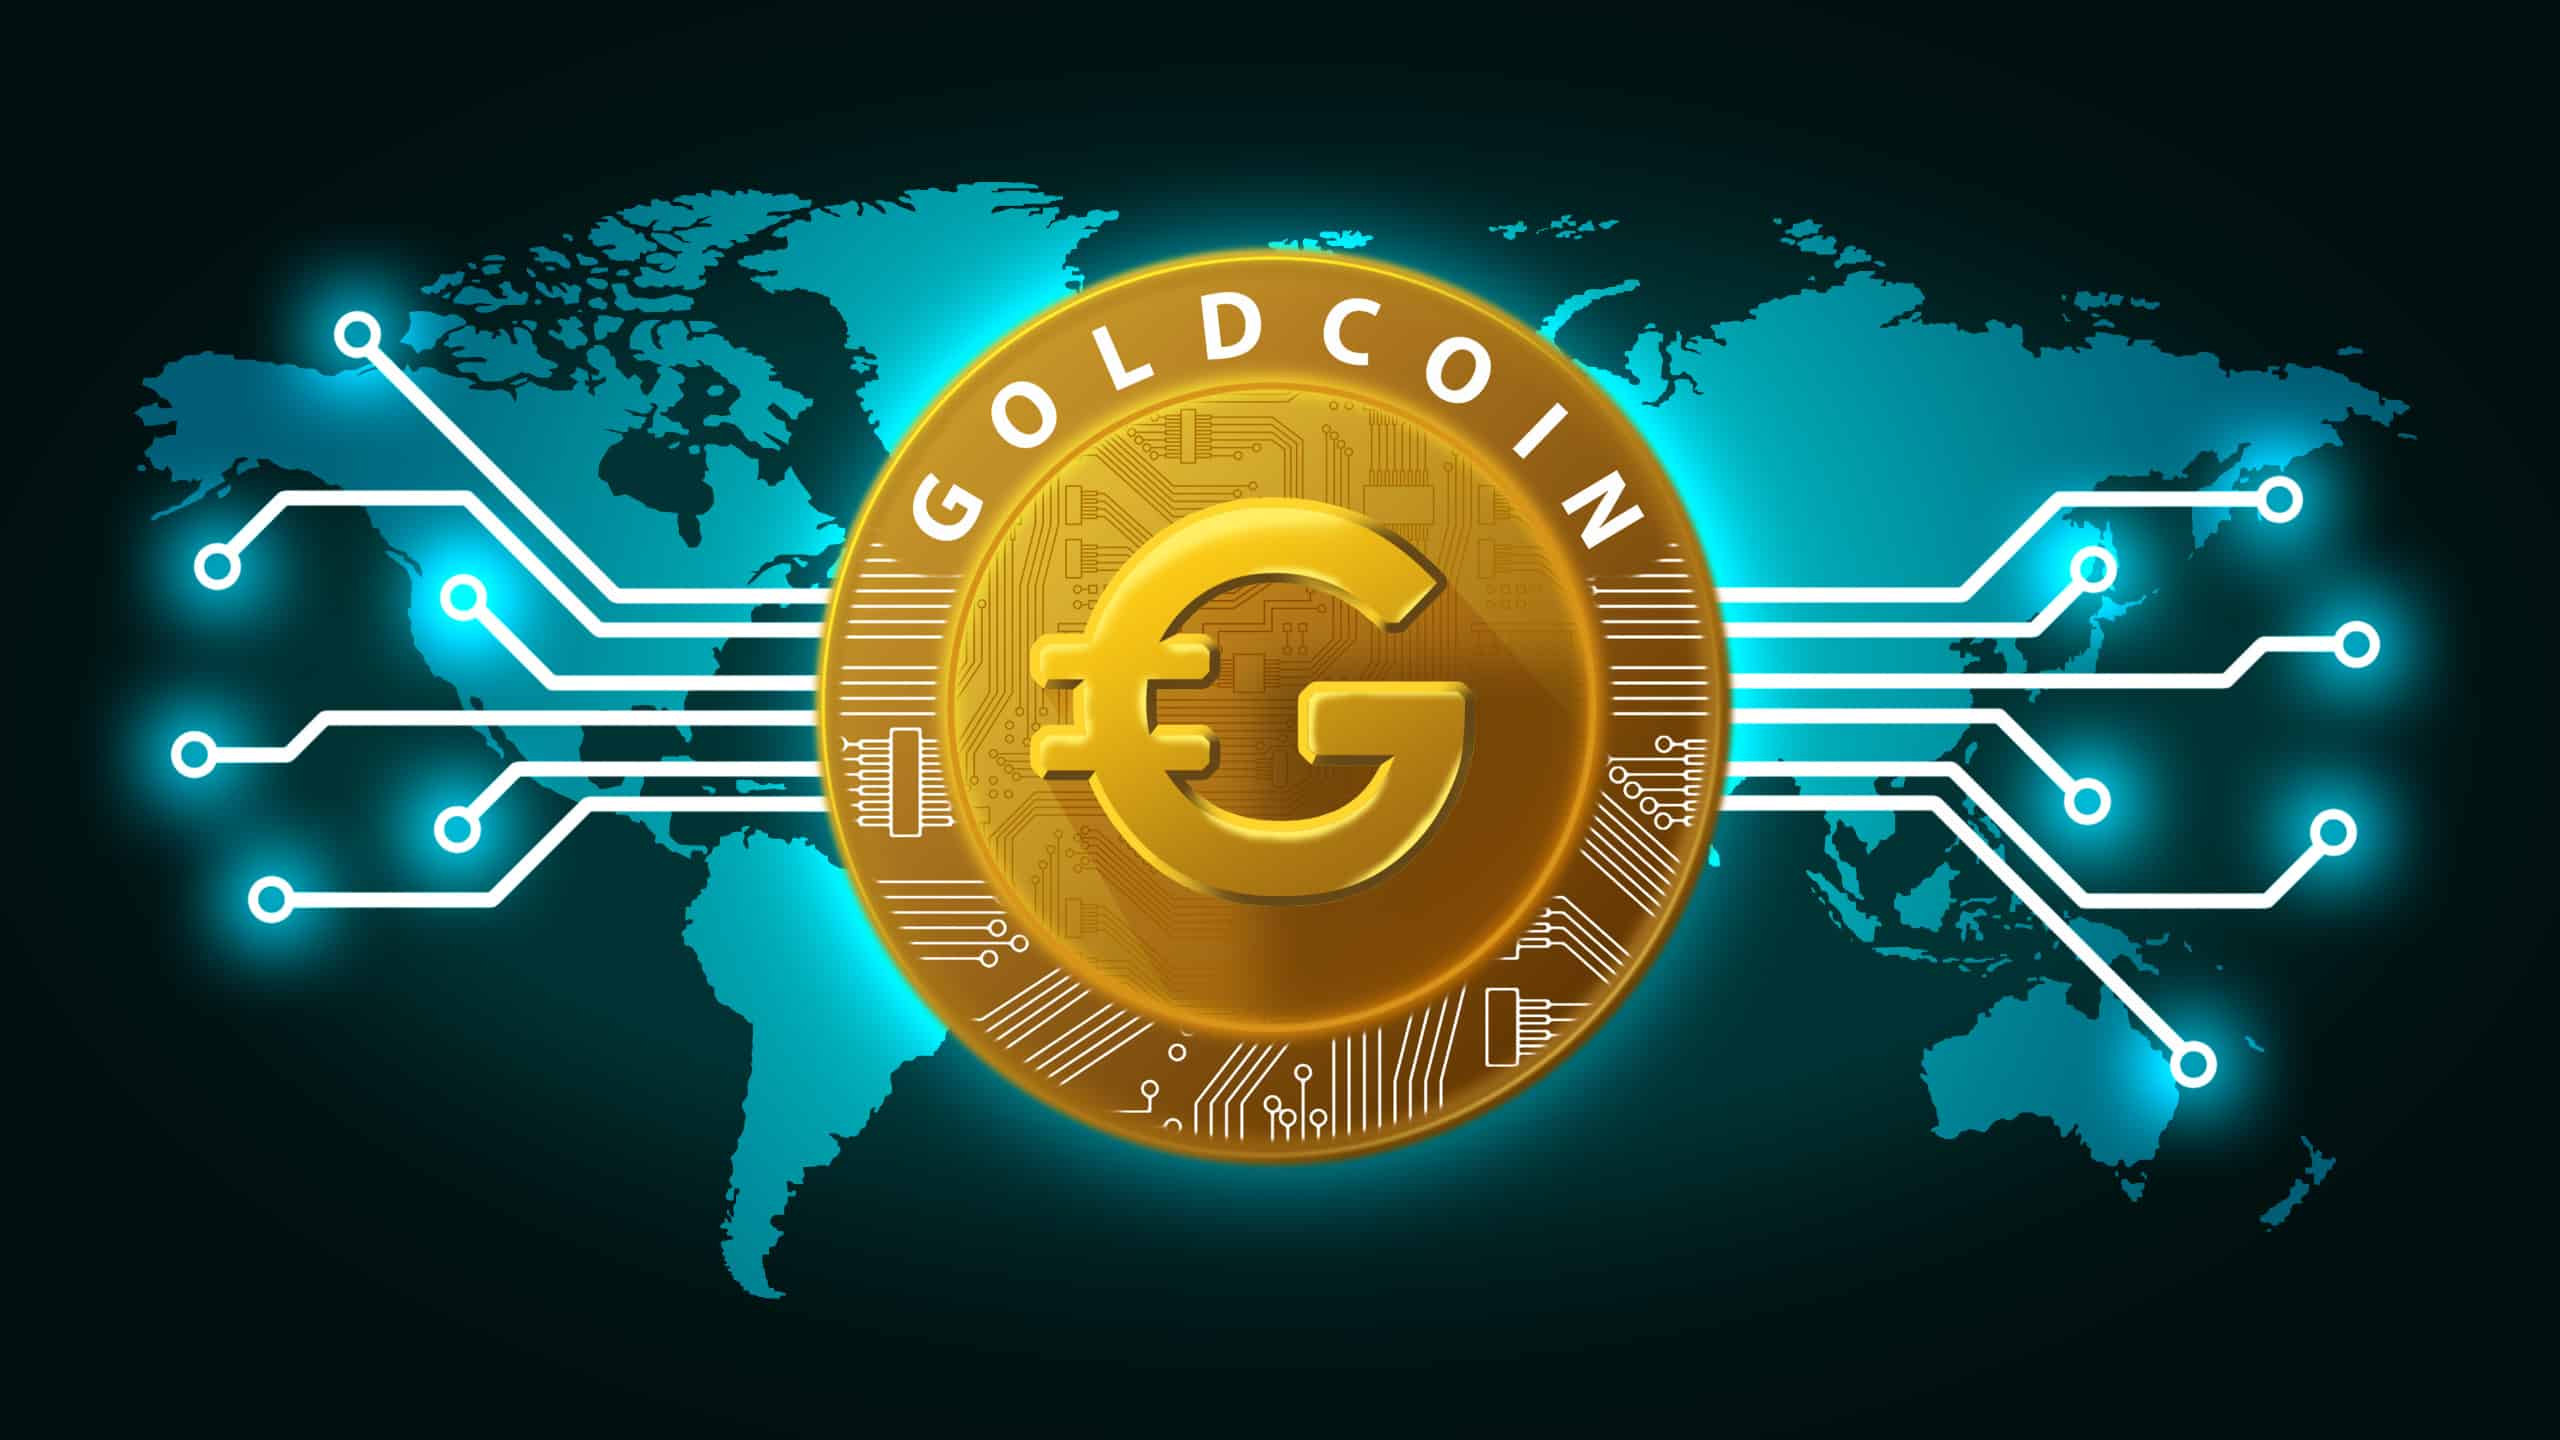 GOLDCOIN (GLC) price jumps 113% to $0.36 - on Heavy ...